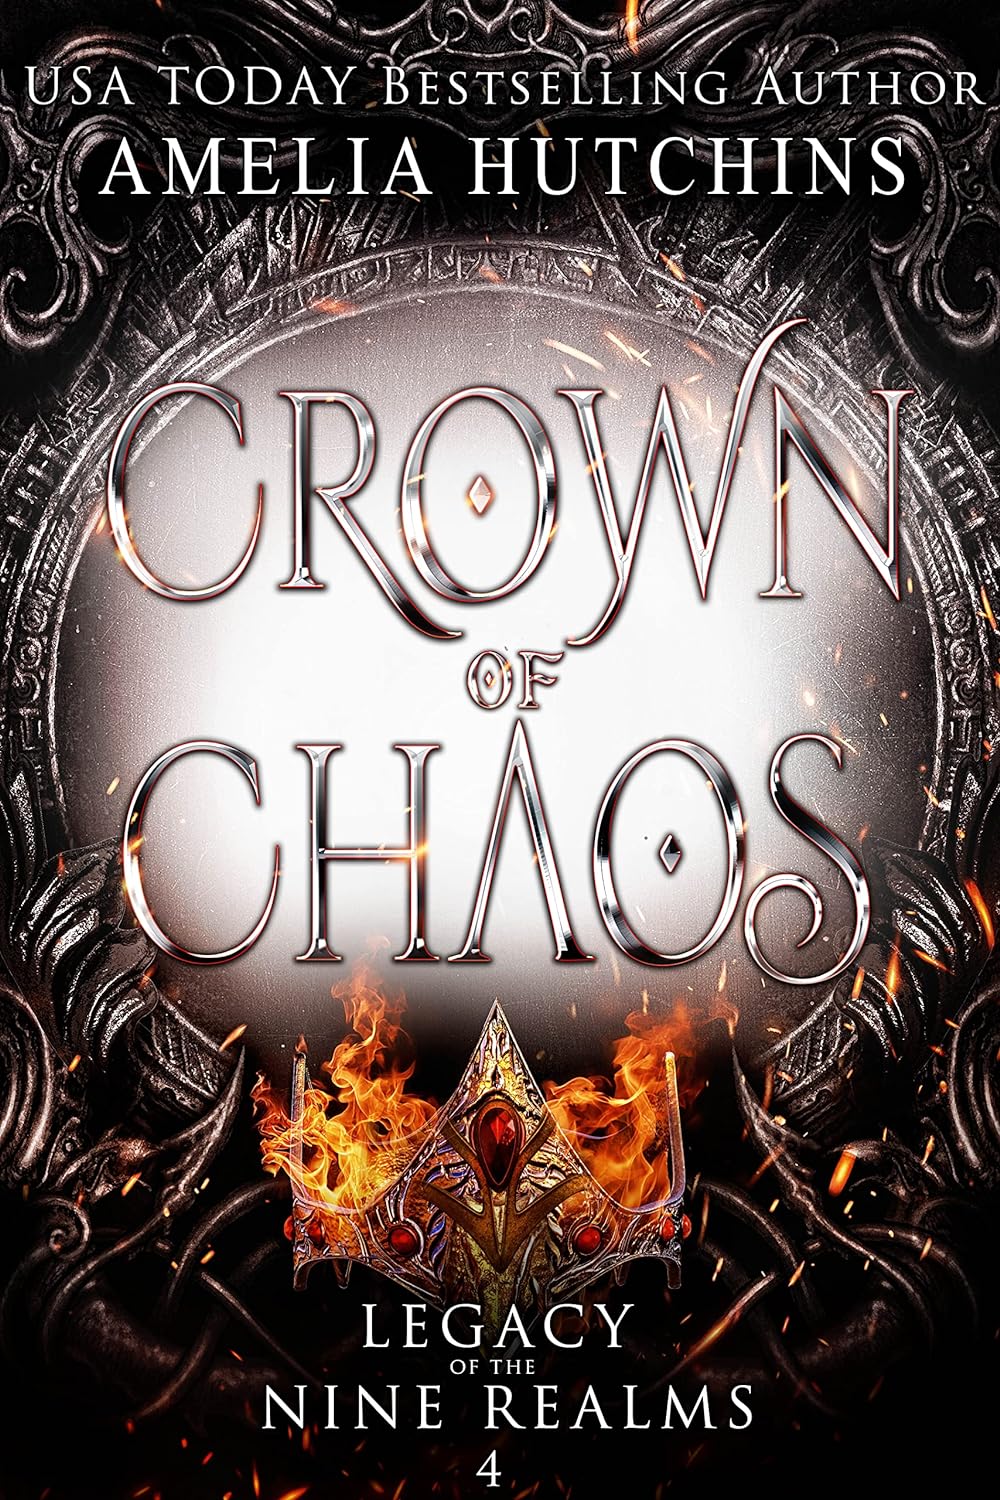 Crown of Chaos (Legacy of the Nine Realms Book 4) by Amelia Hutchins